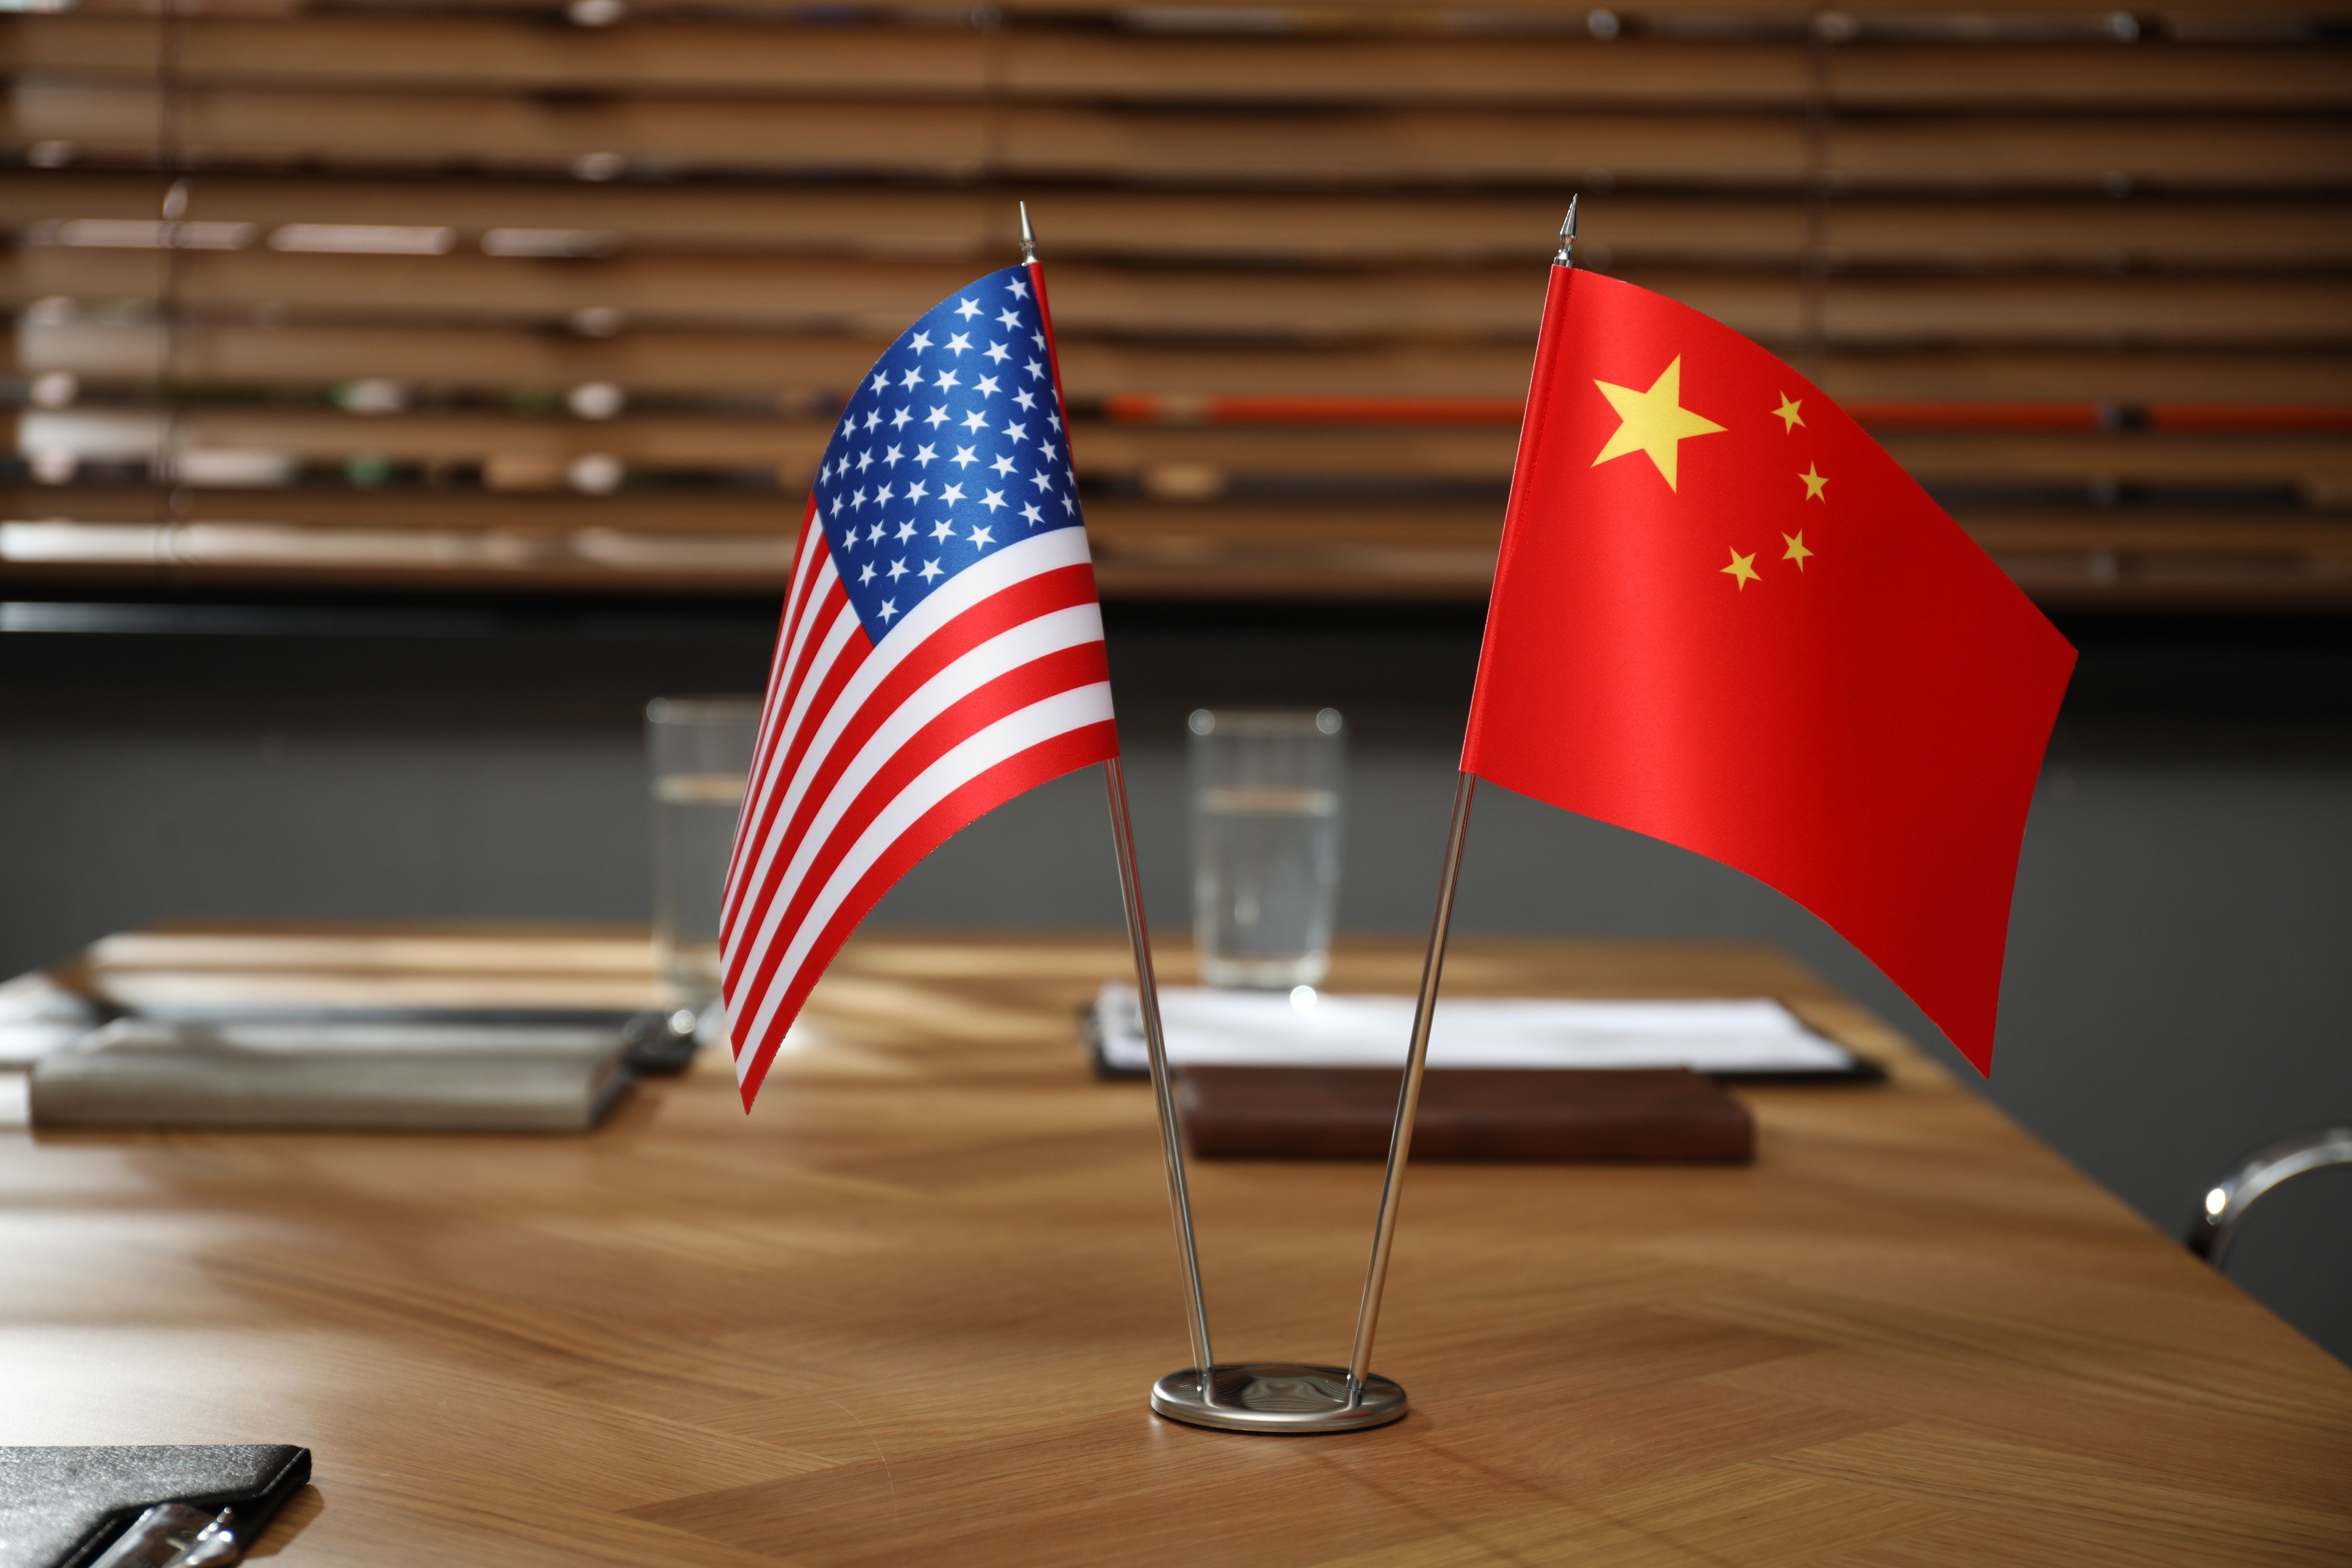 US and China flags. Photo: Shutterstock